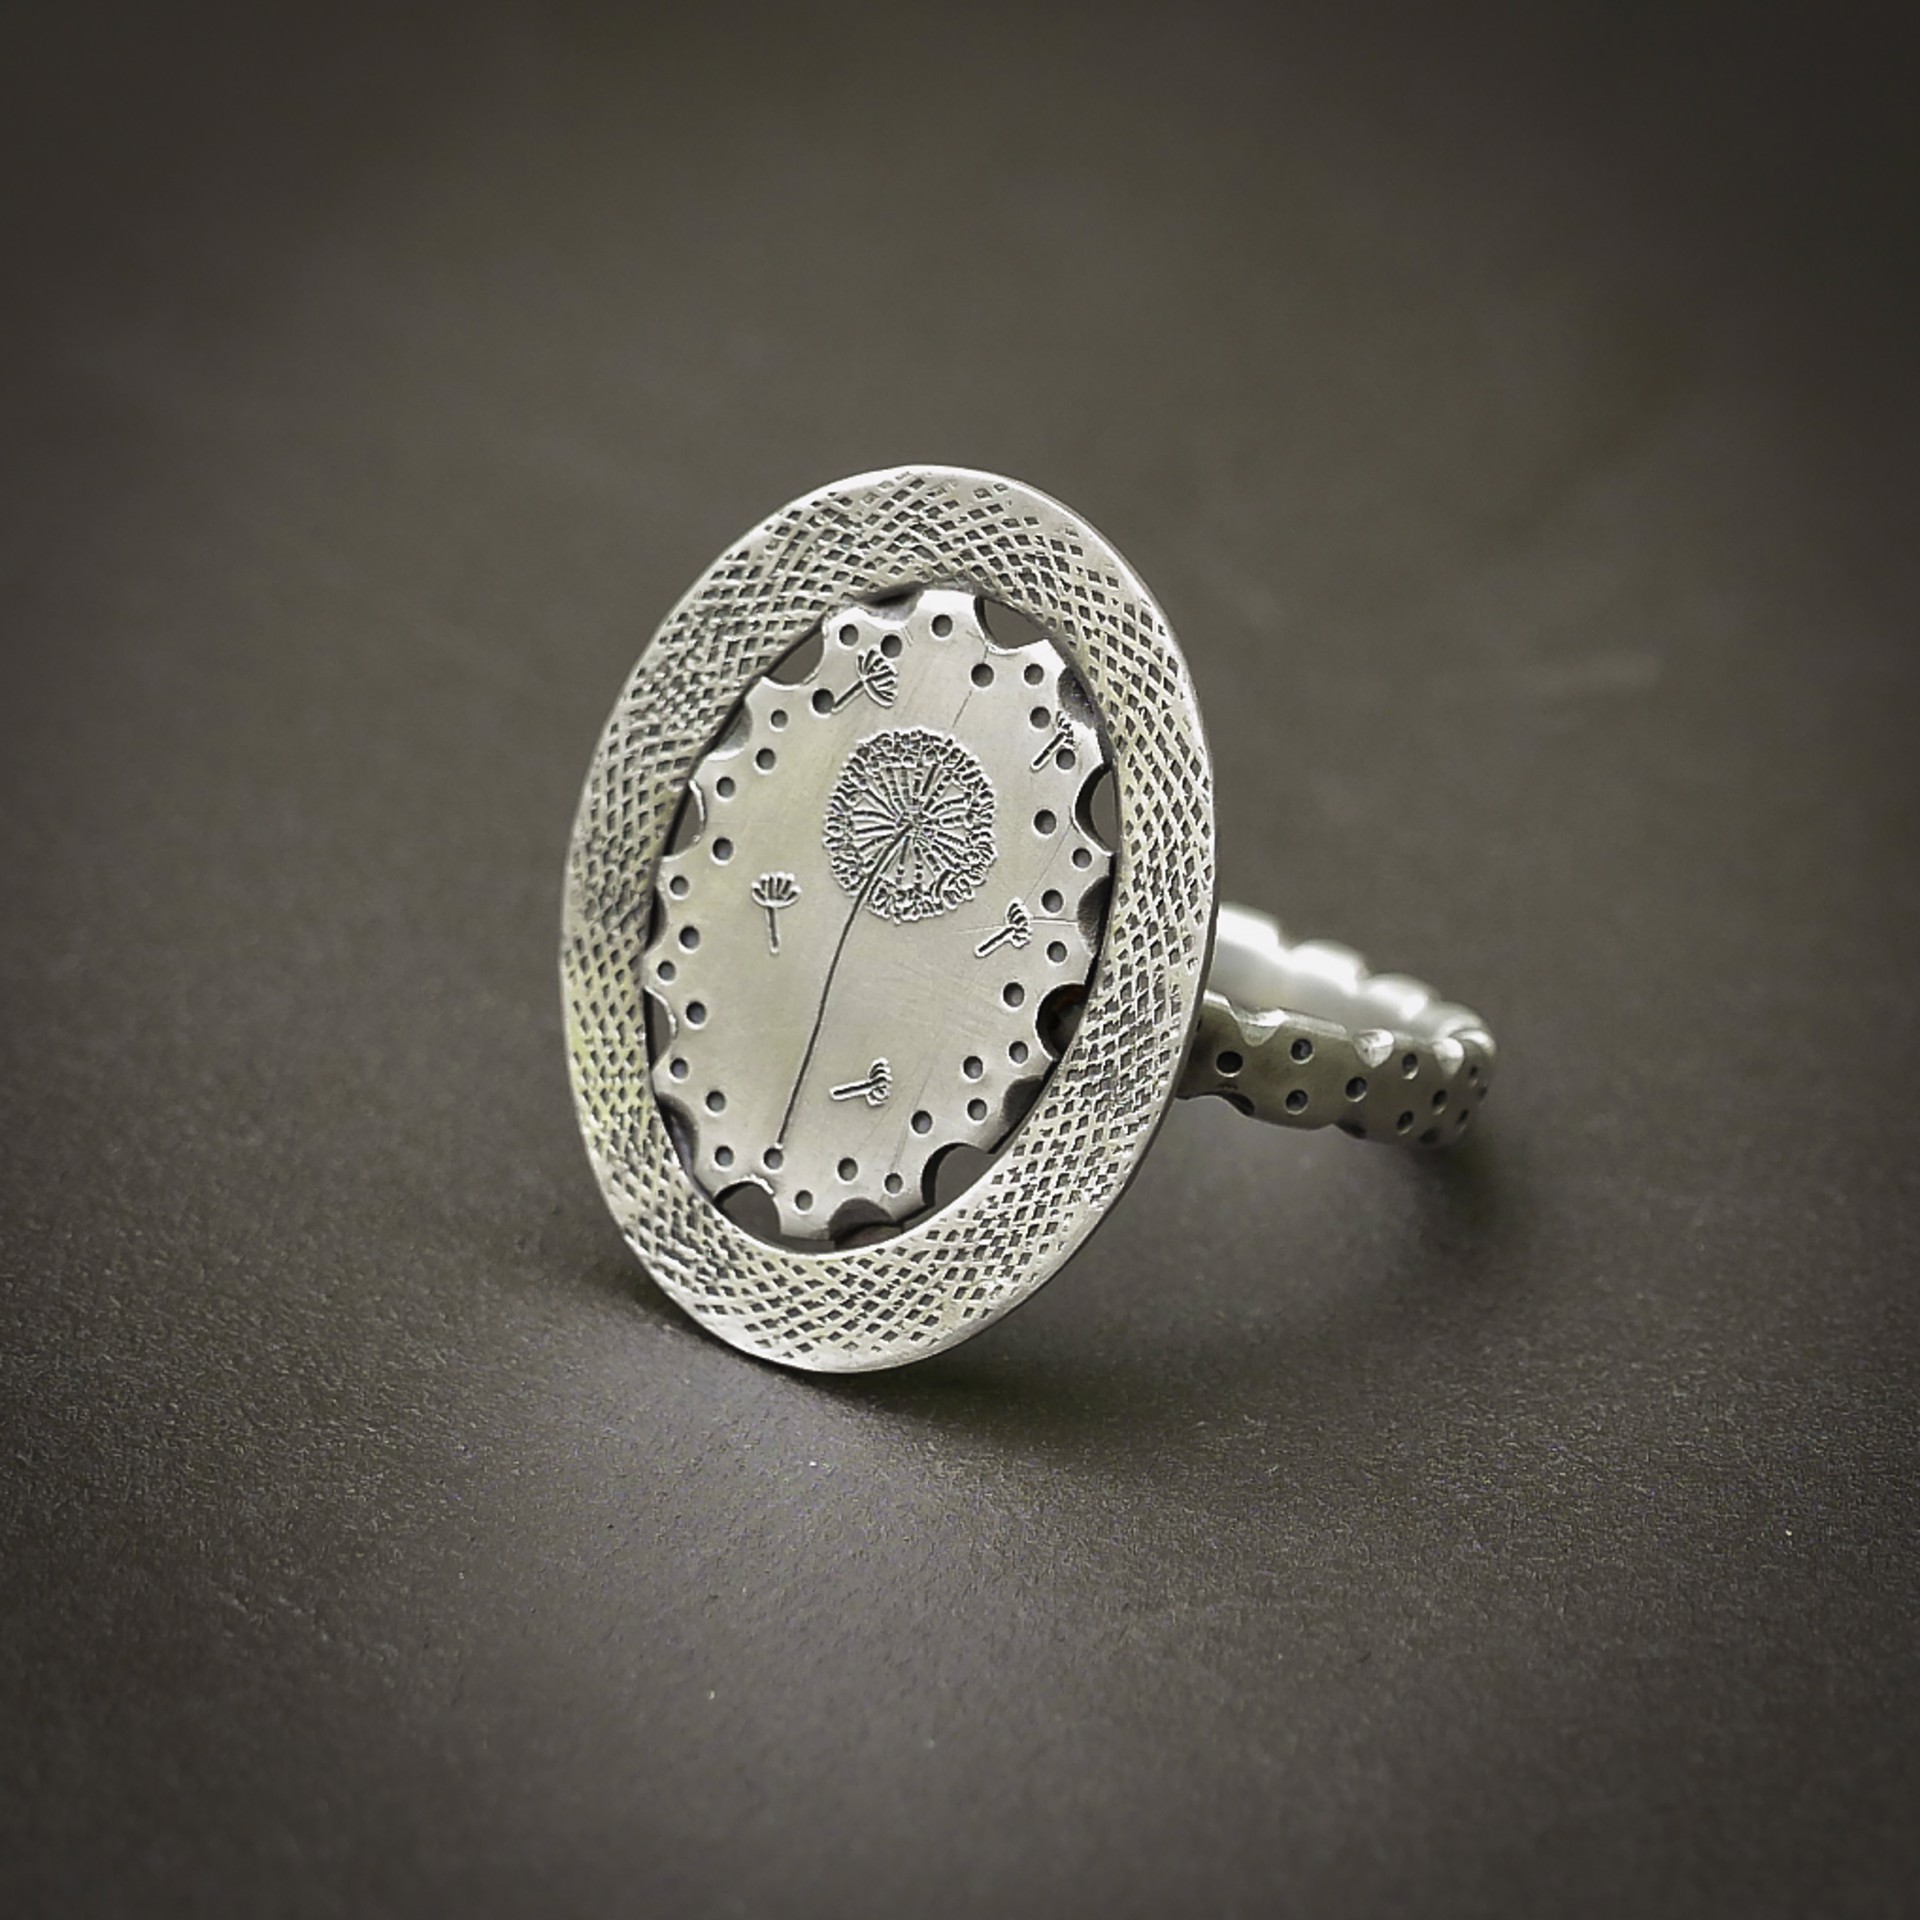 Make A Wish Ring by Beth Lonsinger